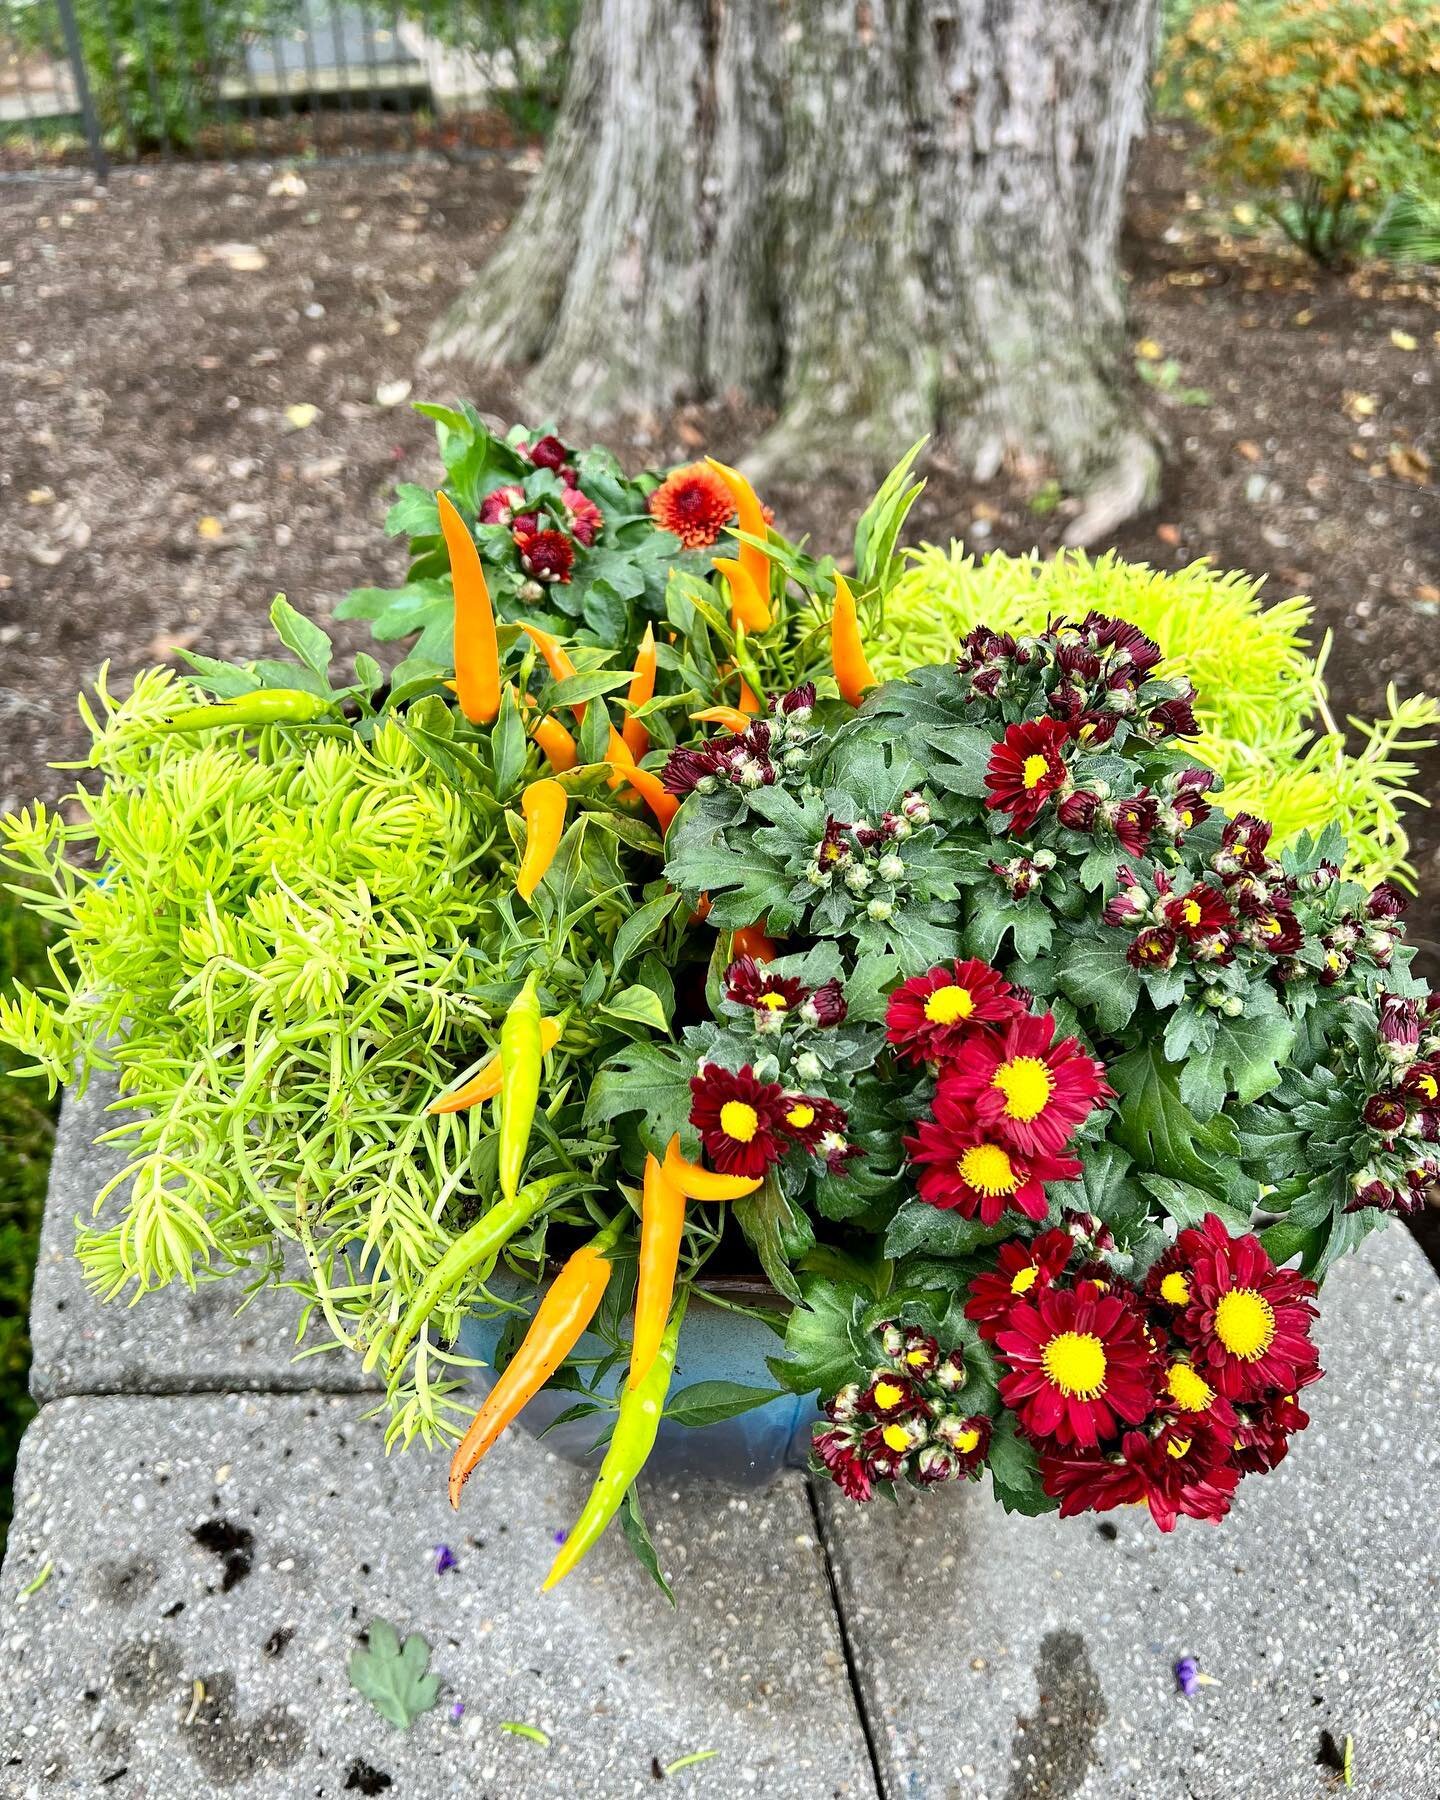 Sugar and spice 🌶️ @yopatches  #flowers #flowerpower #flowerman #fallcolors #falldecor #horticulture #landscaping #landscapingdesign #annarbor #localbusiness #prettycolors